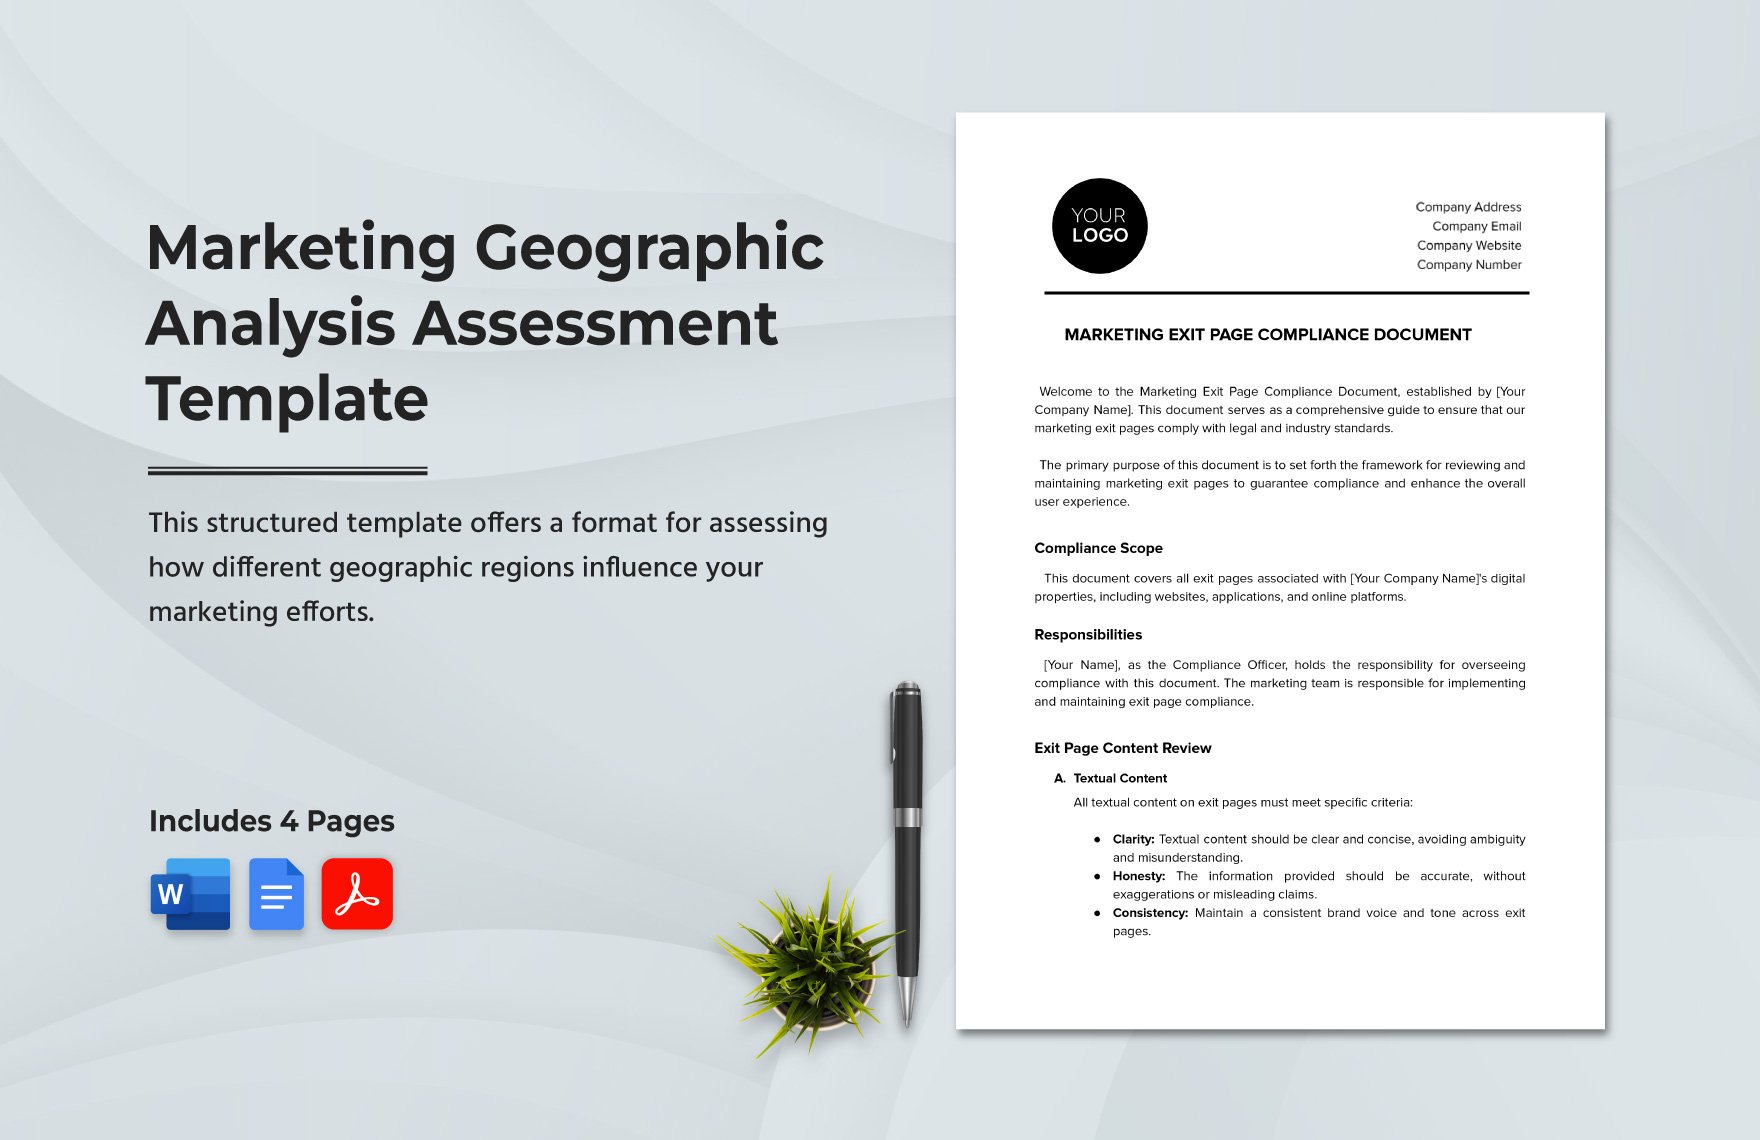 Marketing Geographic Analysis Assessment Template